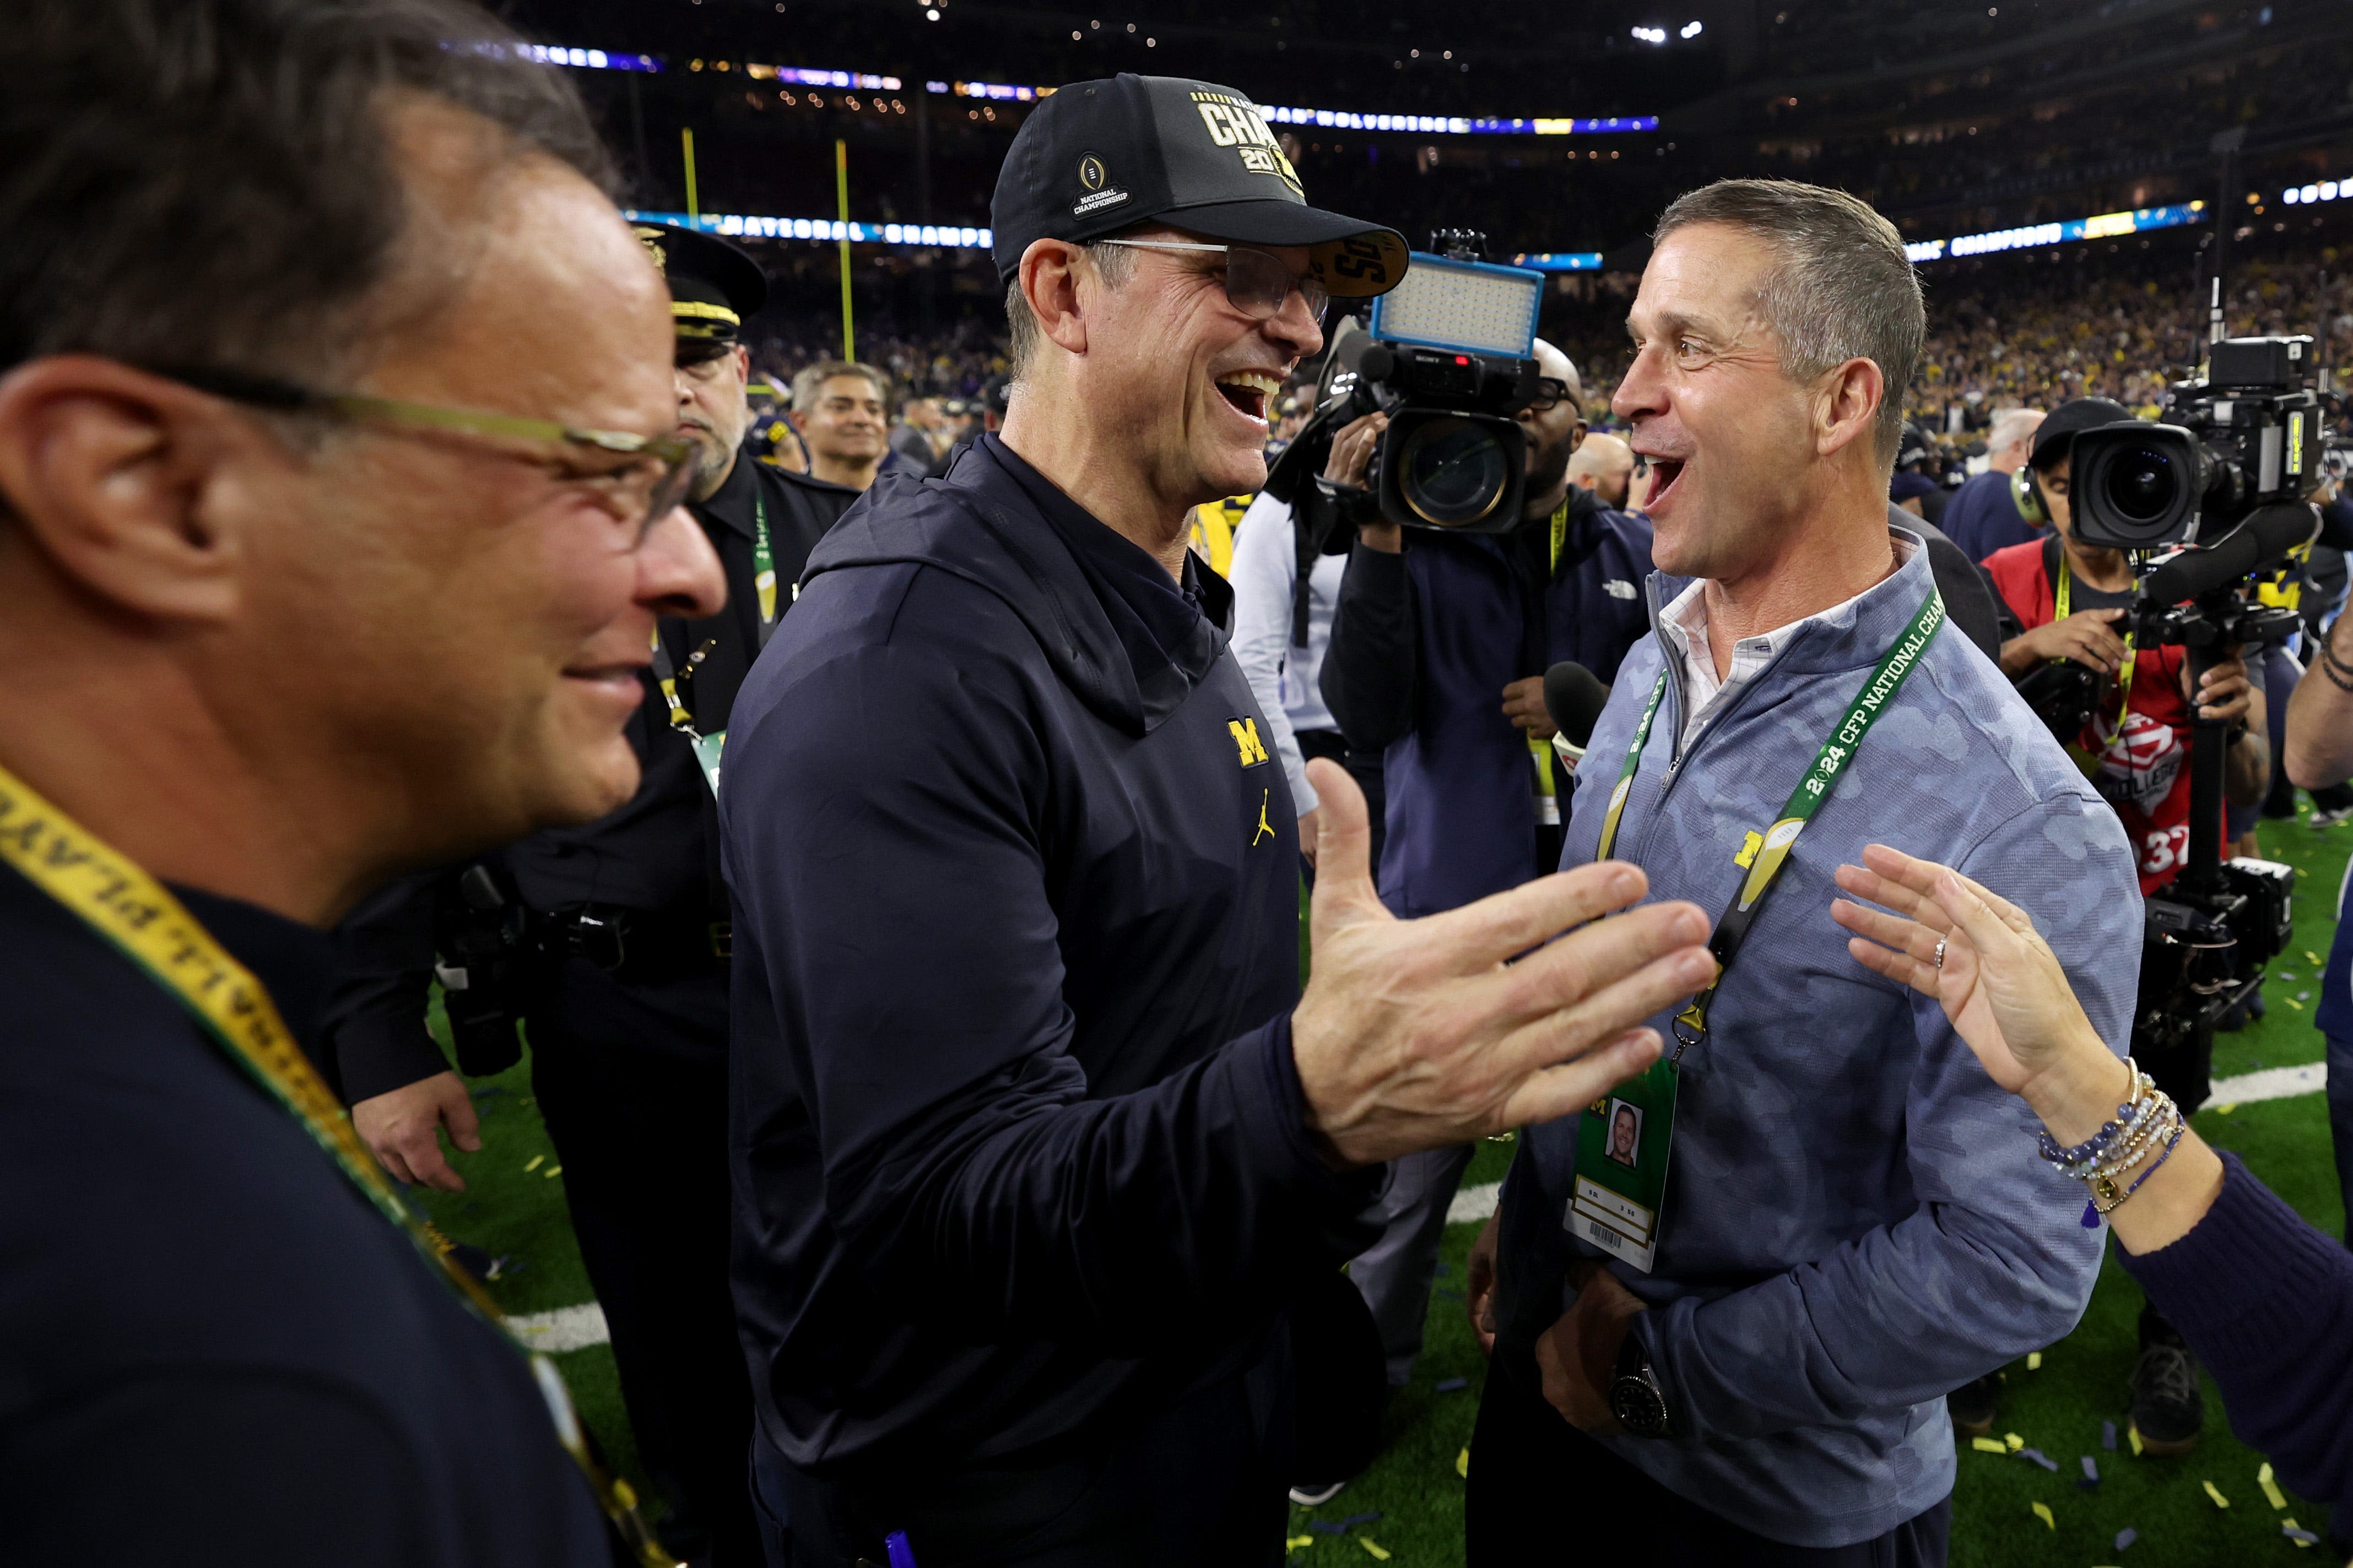 Coach John Harbaugh launches family legacy project: `It’s about my dad,’ Jim Harbaugh said